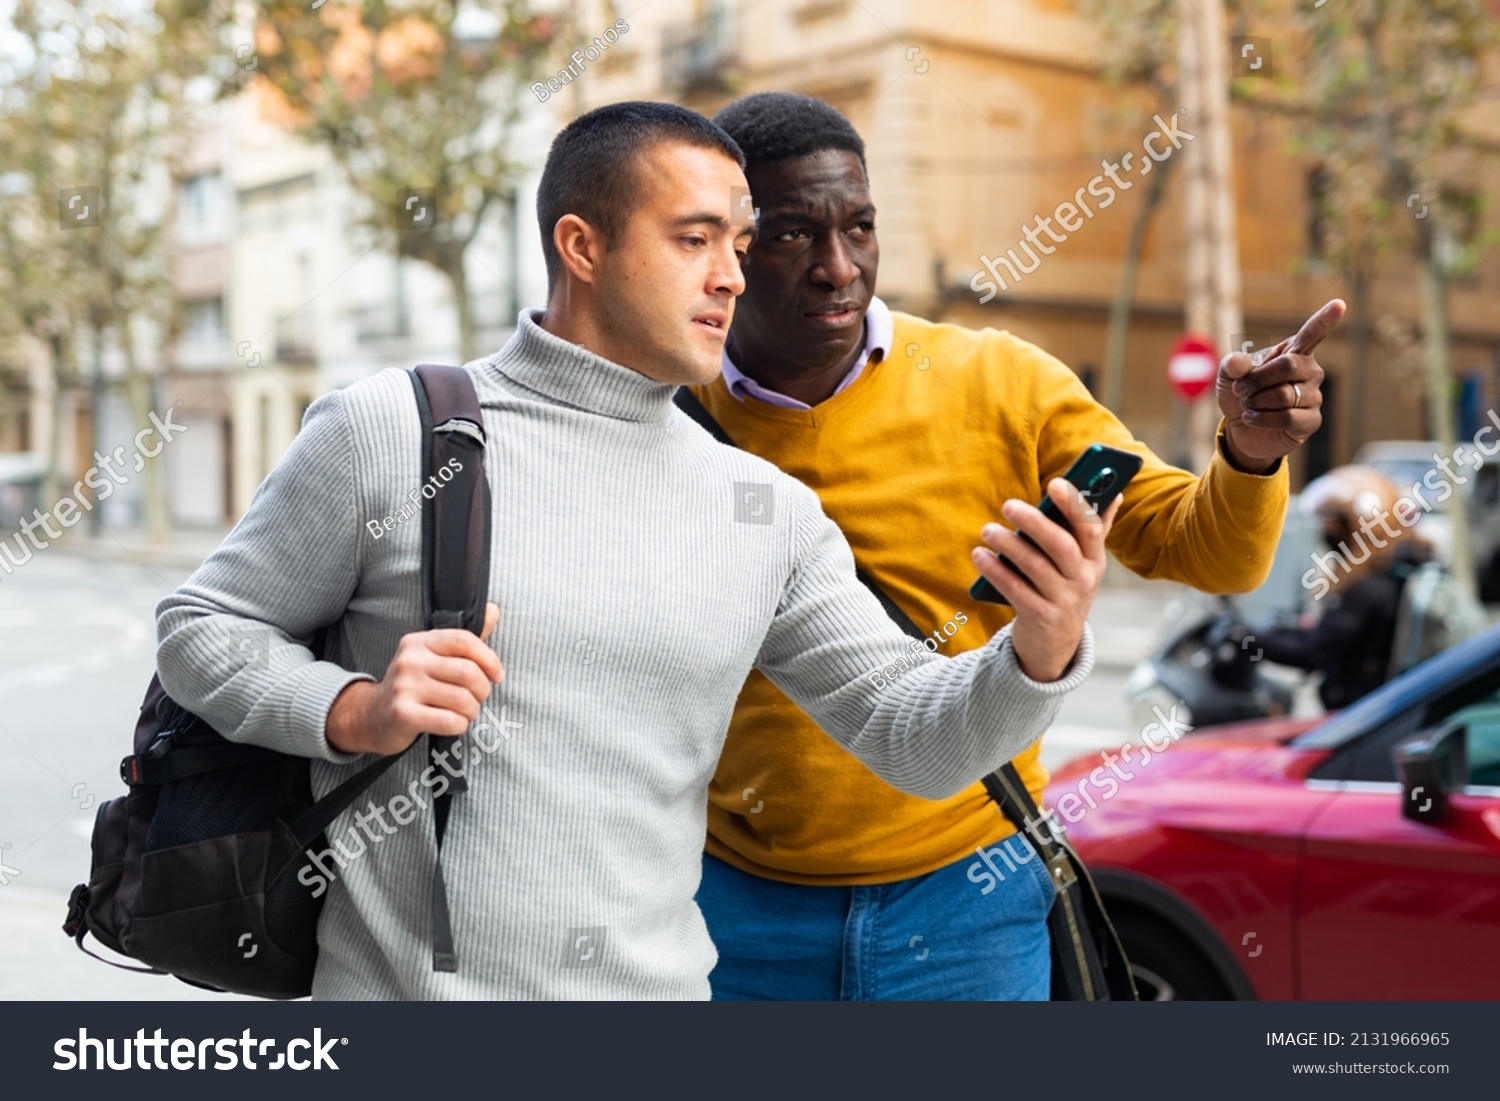 European man with smartphone having conversation with African-american man about directions. #2131966965